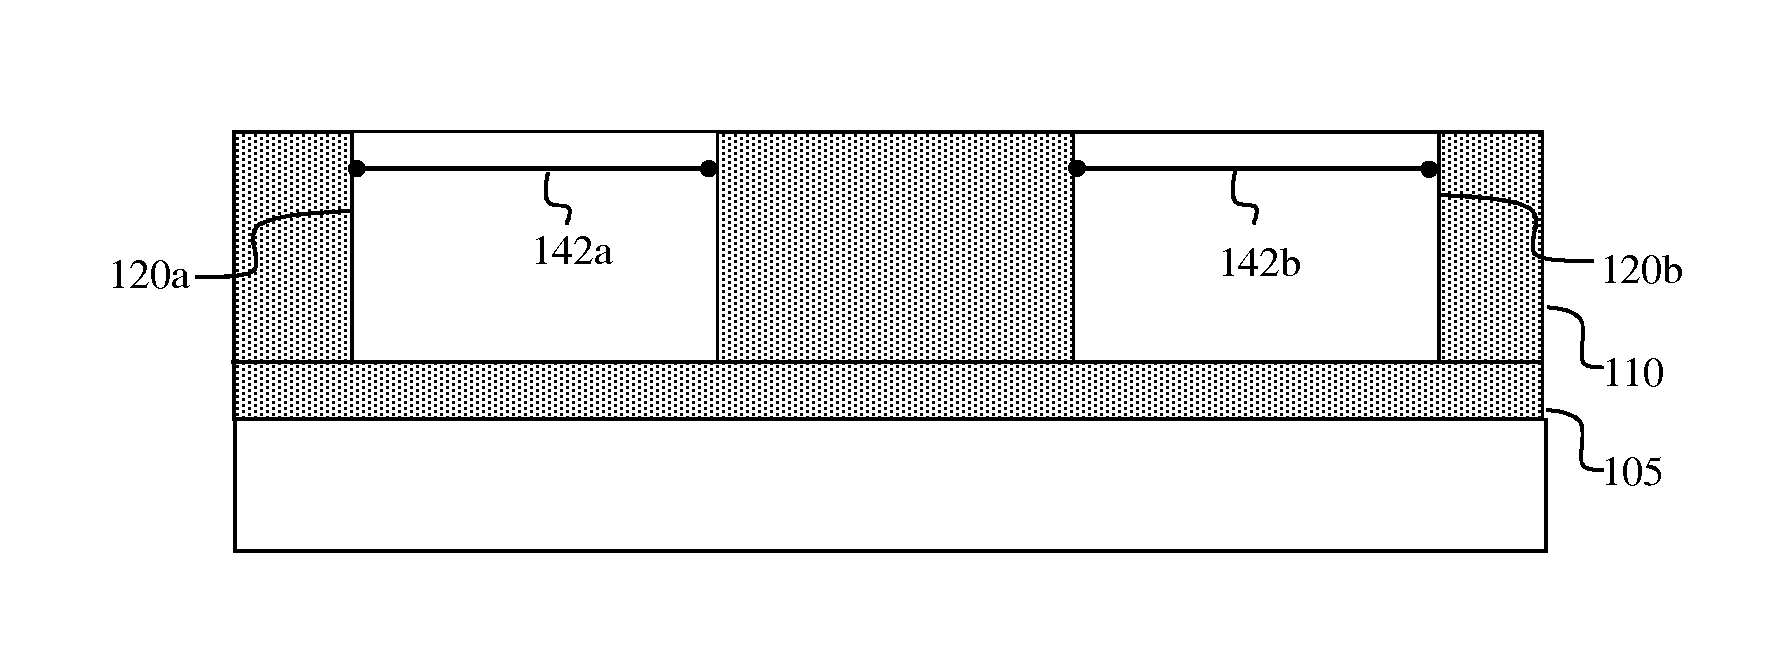 Damascene method of forming a semiconductor structure and a semiconductor structure with multiple fin-shaped channel regions having different widths